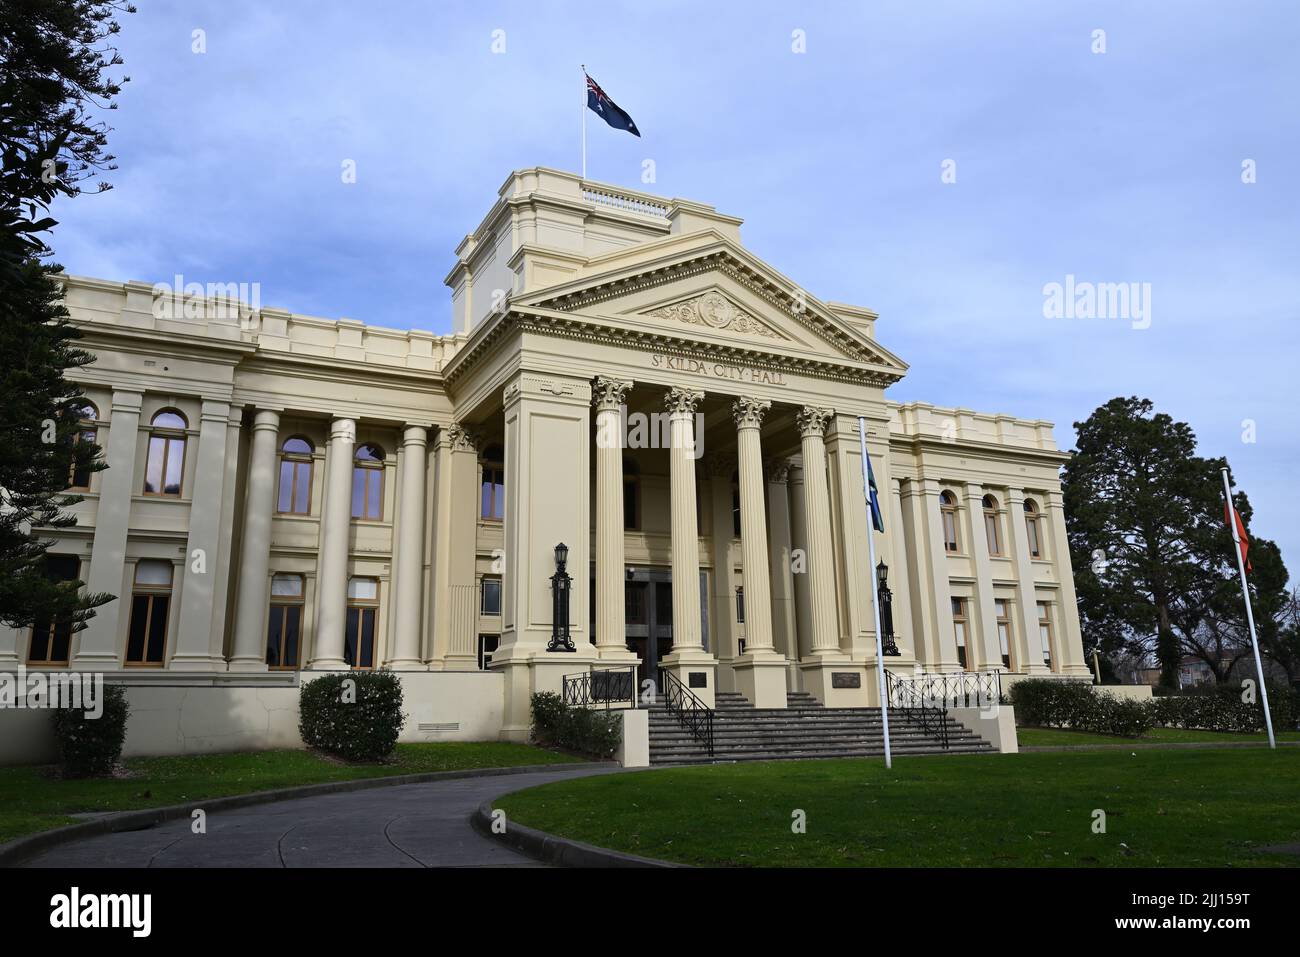 Main facade and classical portico of the grand St Kilda Town Hall, also known as St Kilda City Hall, during a cloudy afternoon Stock Photo